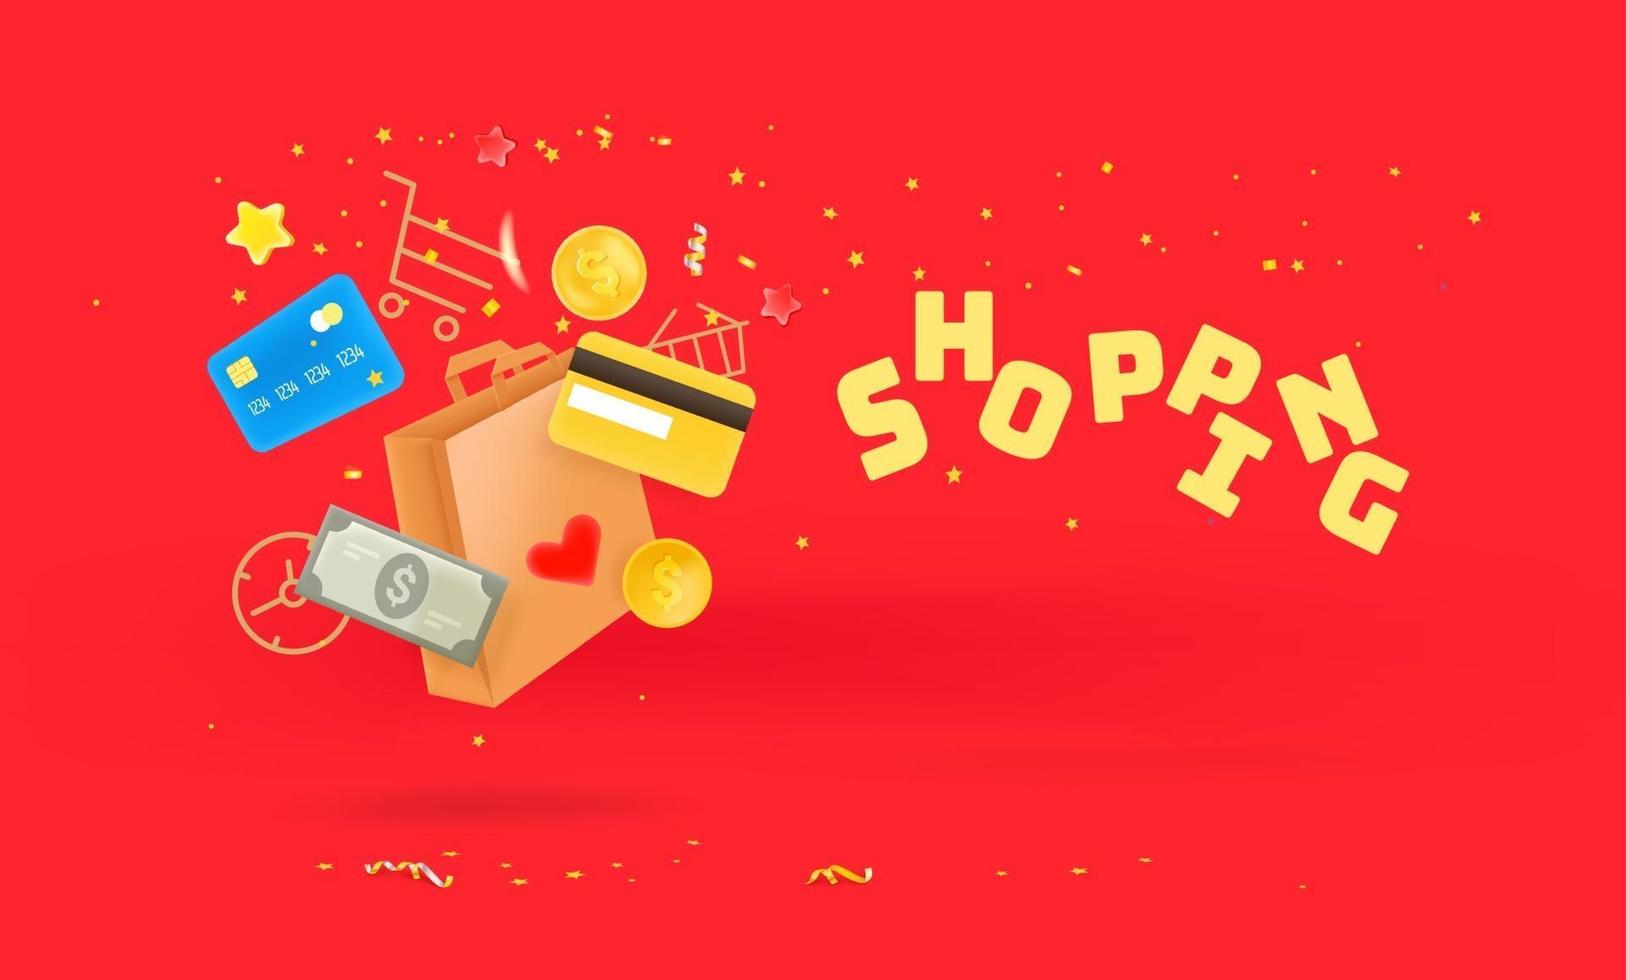 Shopping time concept. Shopping bag, credit cards and money falling down. 3d style cute illustration vector